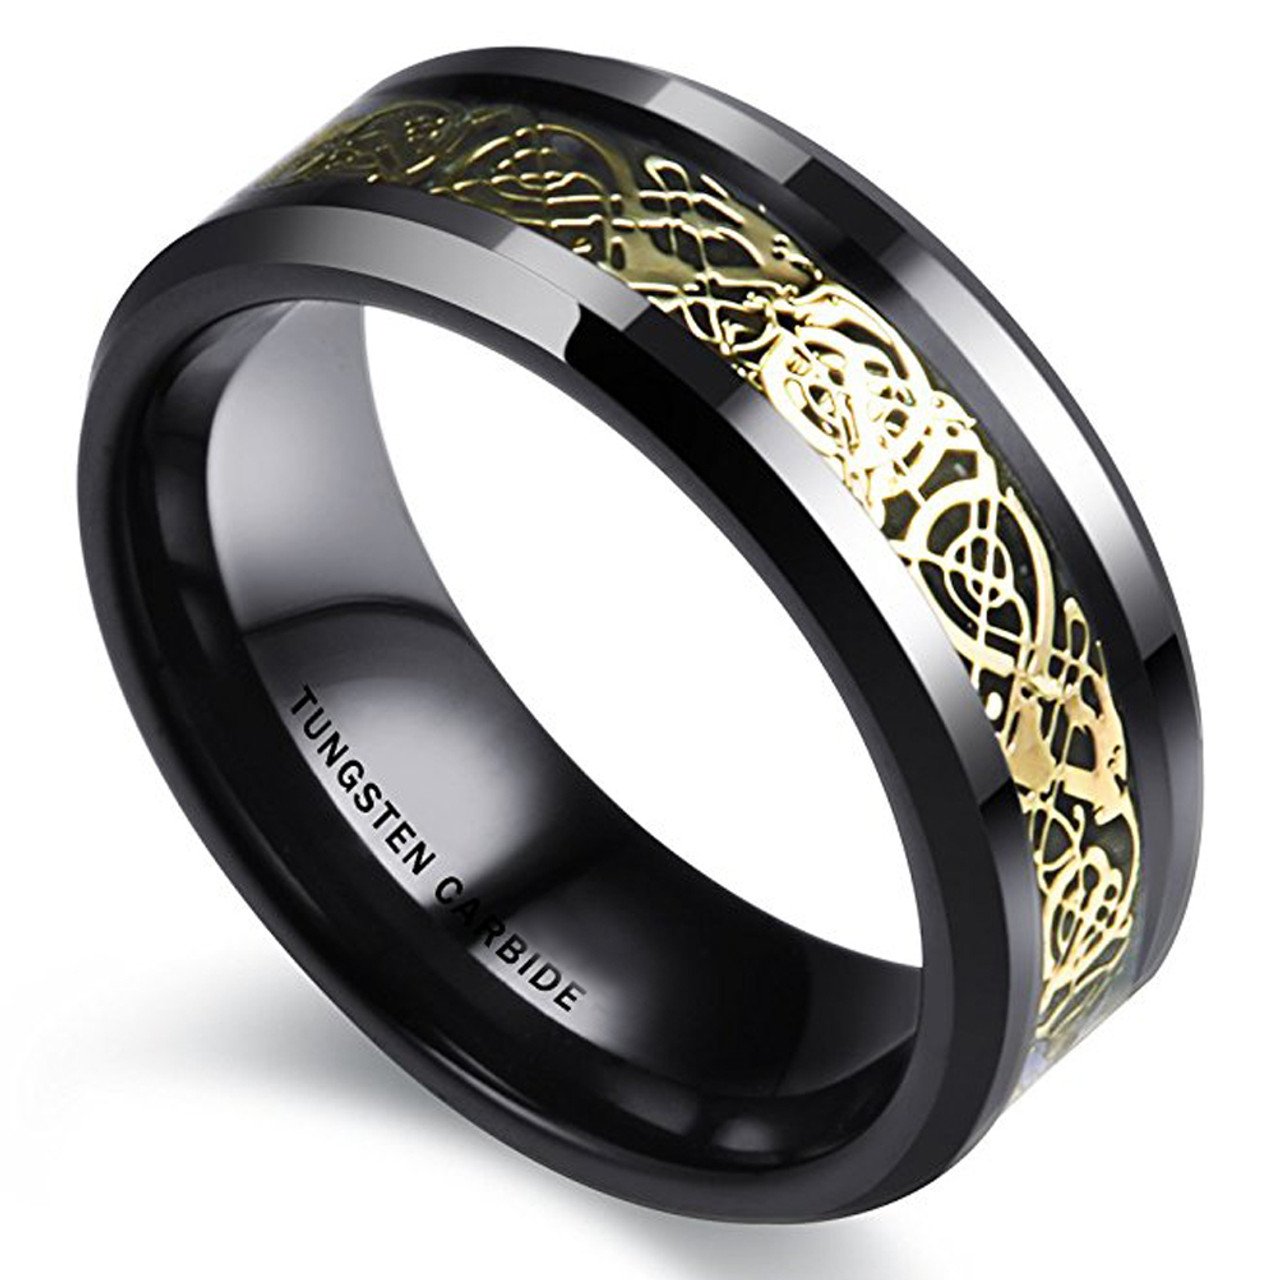 Men's Tungsten Wedding Band (8mm). Celtic Wedding Band Black with Gold Resin Inlay. Celtic Knot Tungsten Carbide Ring